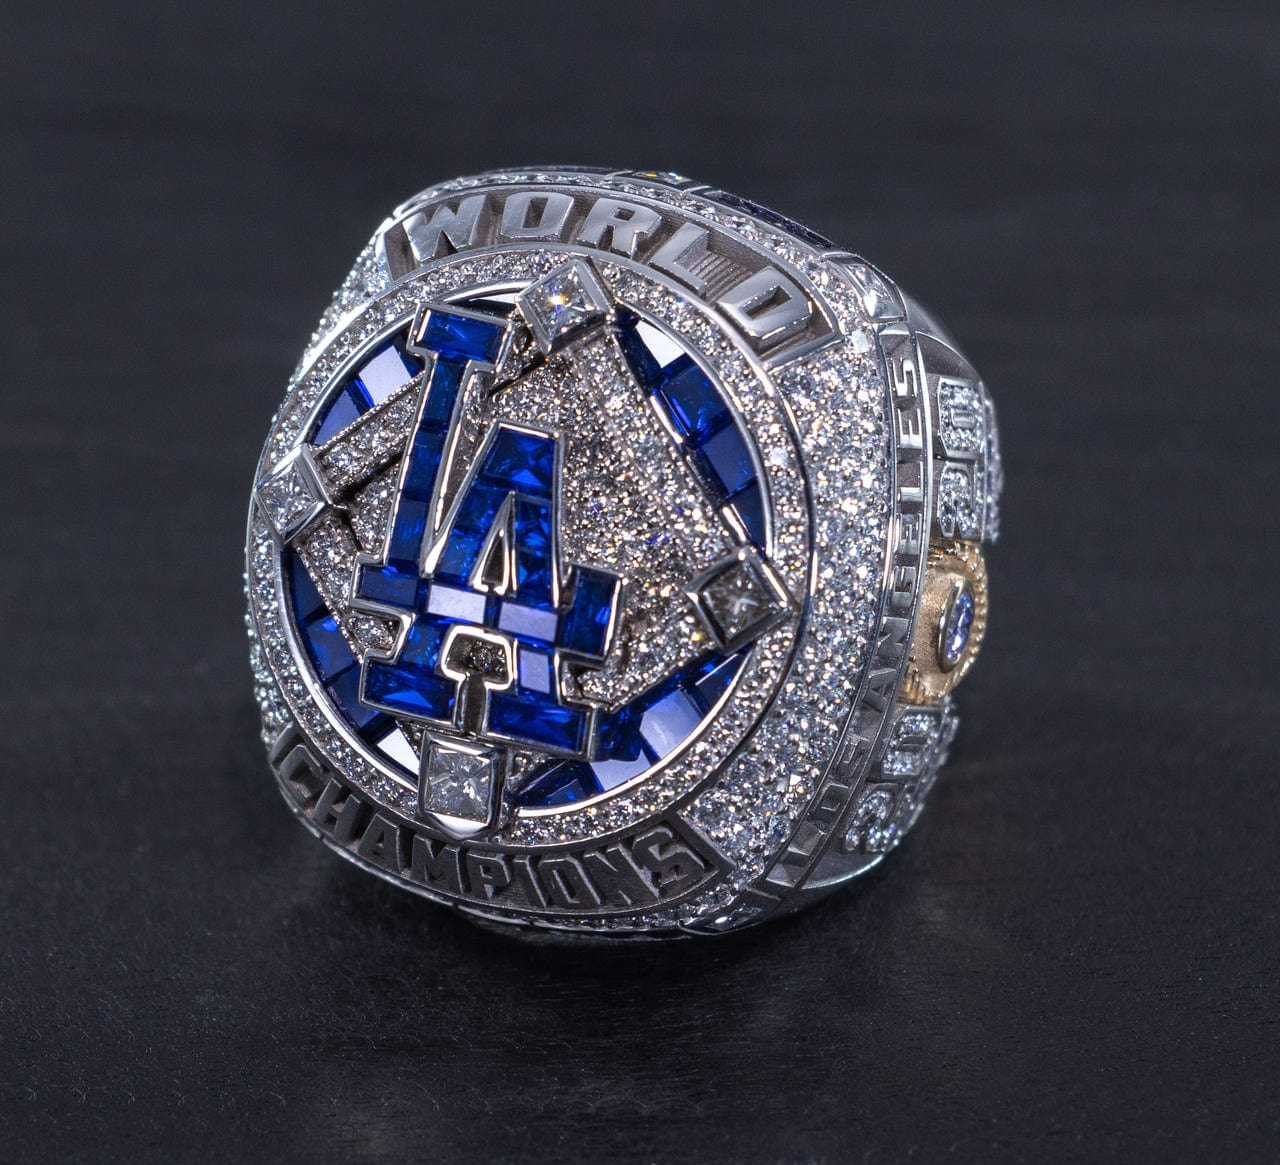 2020 Dodgers Championship Ring Side Angle 